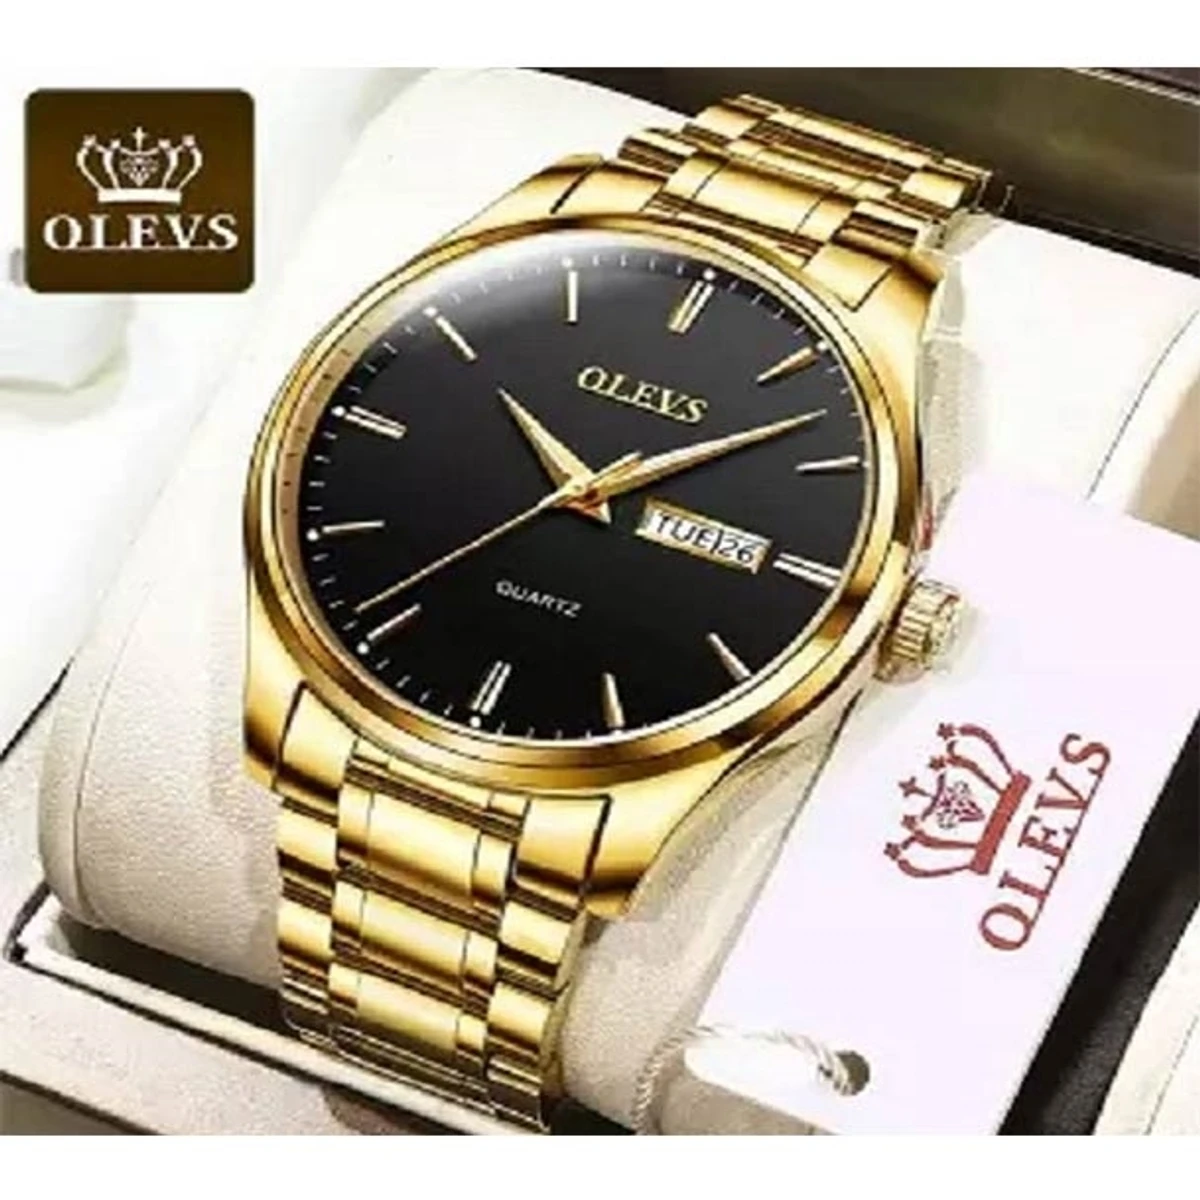 Olevs 6898 Black Stainless Steel Analoge Wrist Watch For Men Golden  Chain dial black colour watch- MAN  WATCH